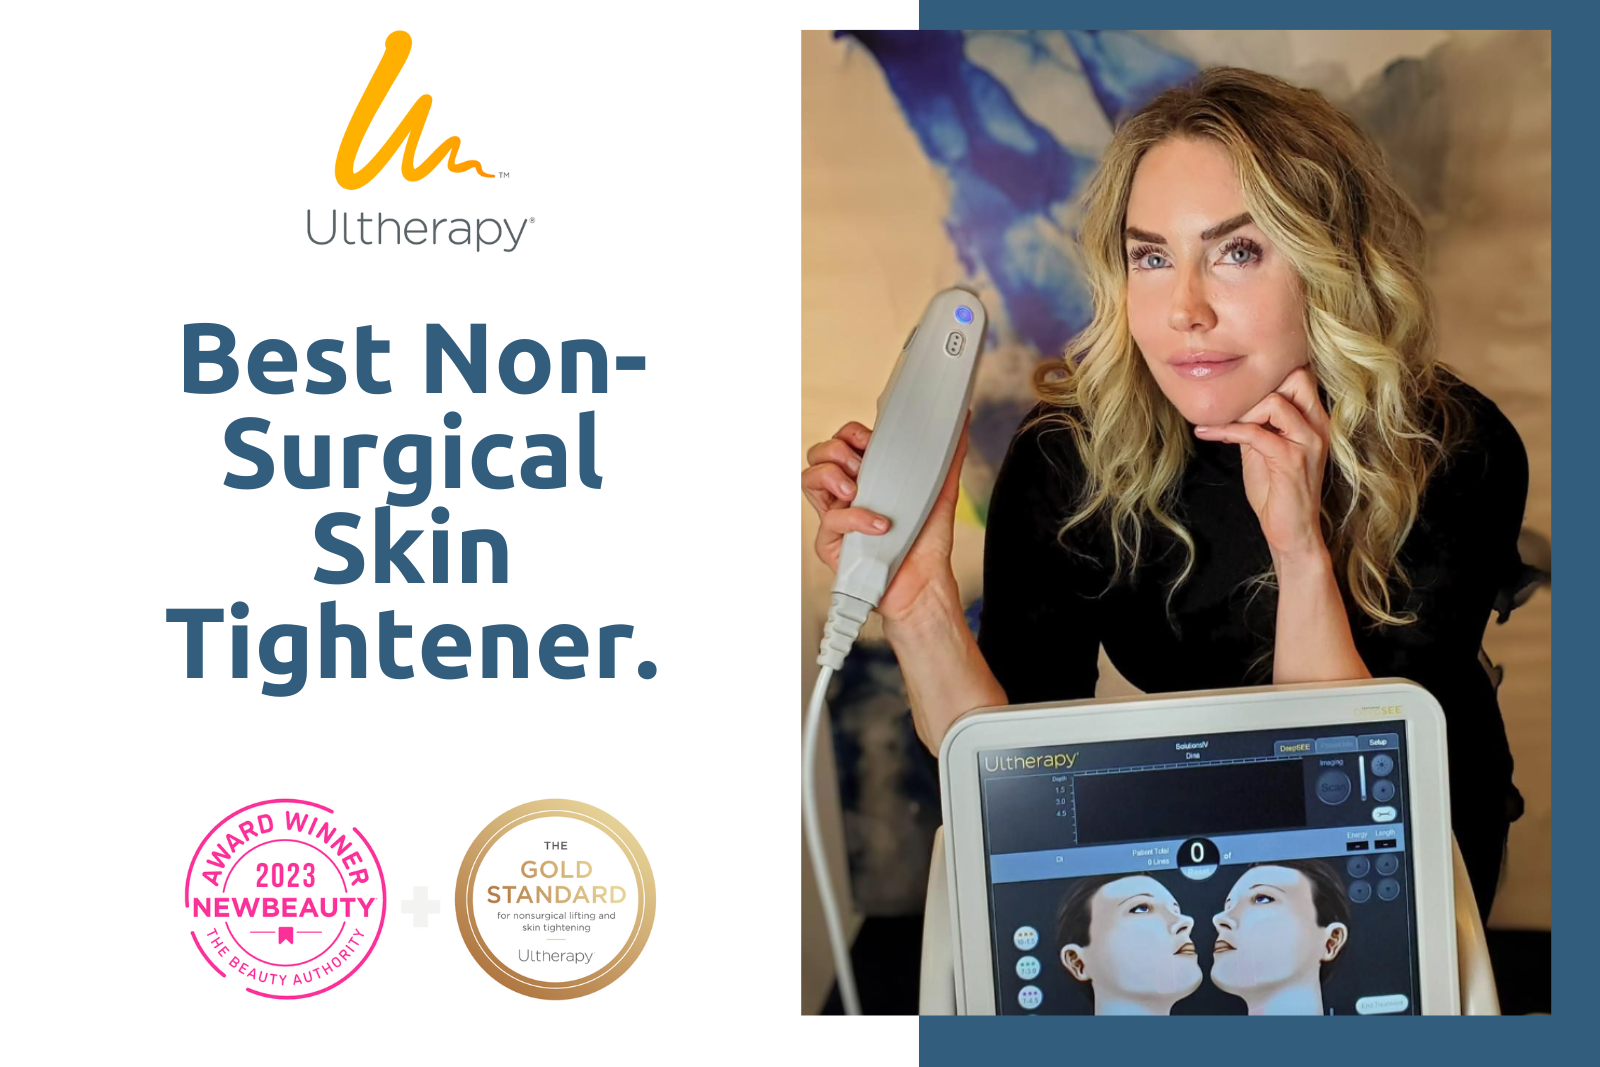 Ultherapy, Natural-Looking Results That Improve Over Time